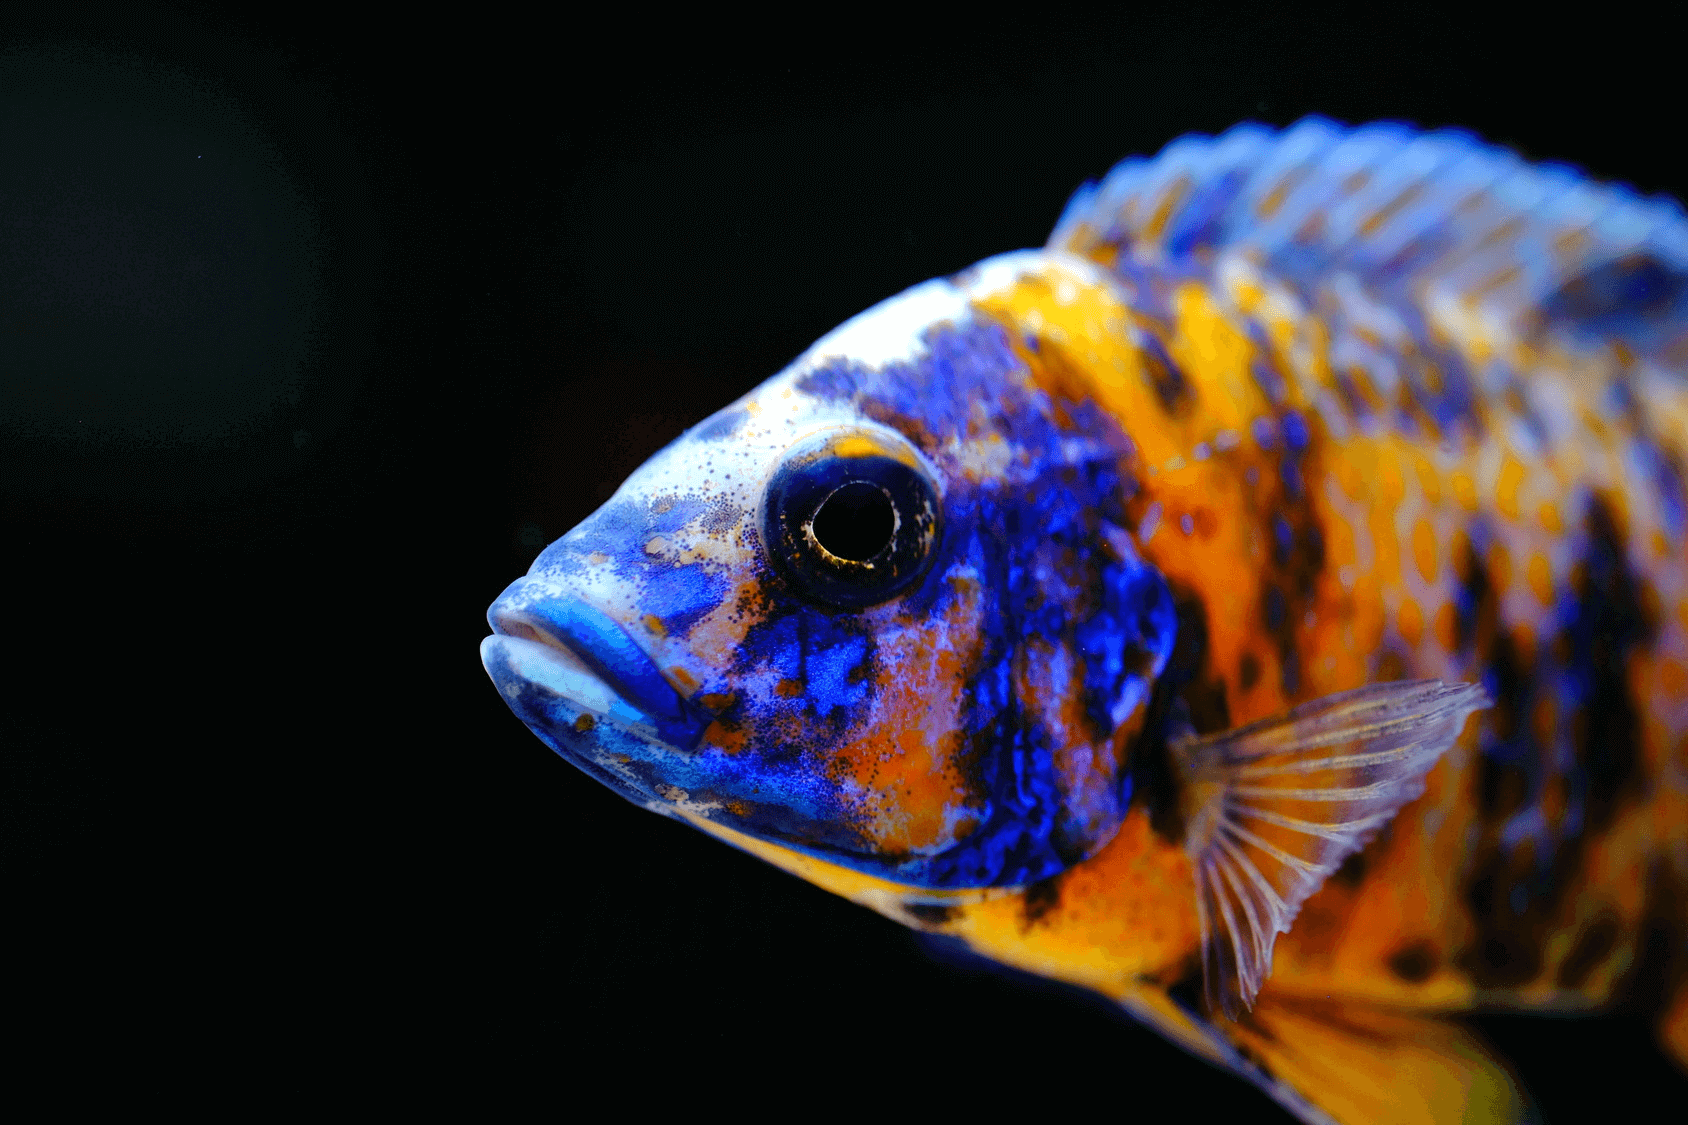 Peacock cichlid Top 10 Most Beautiful Colorful Fish Types - 23